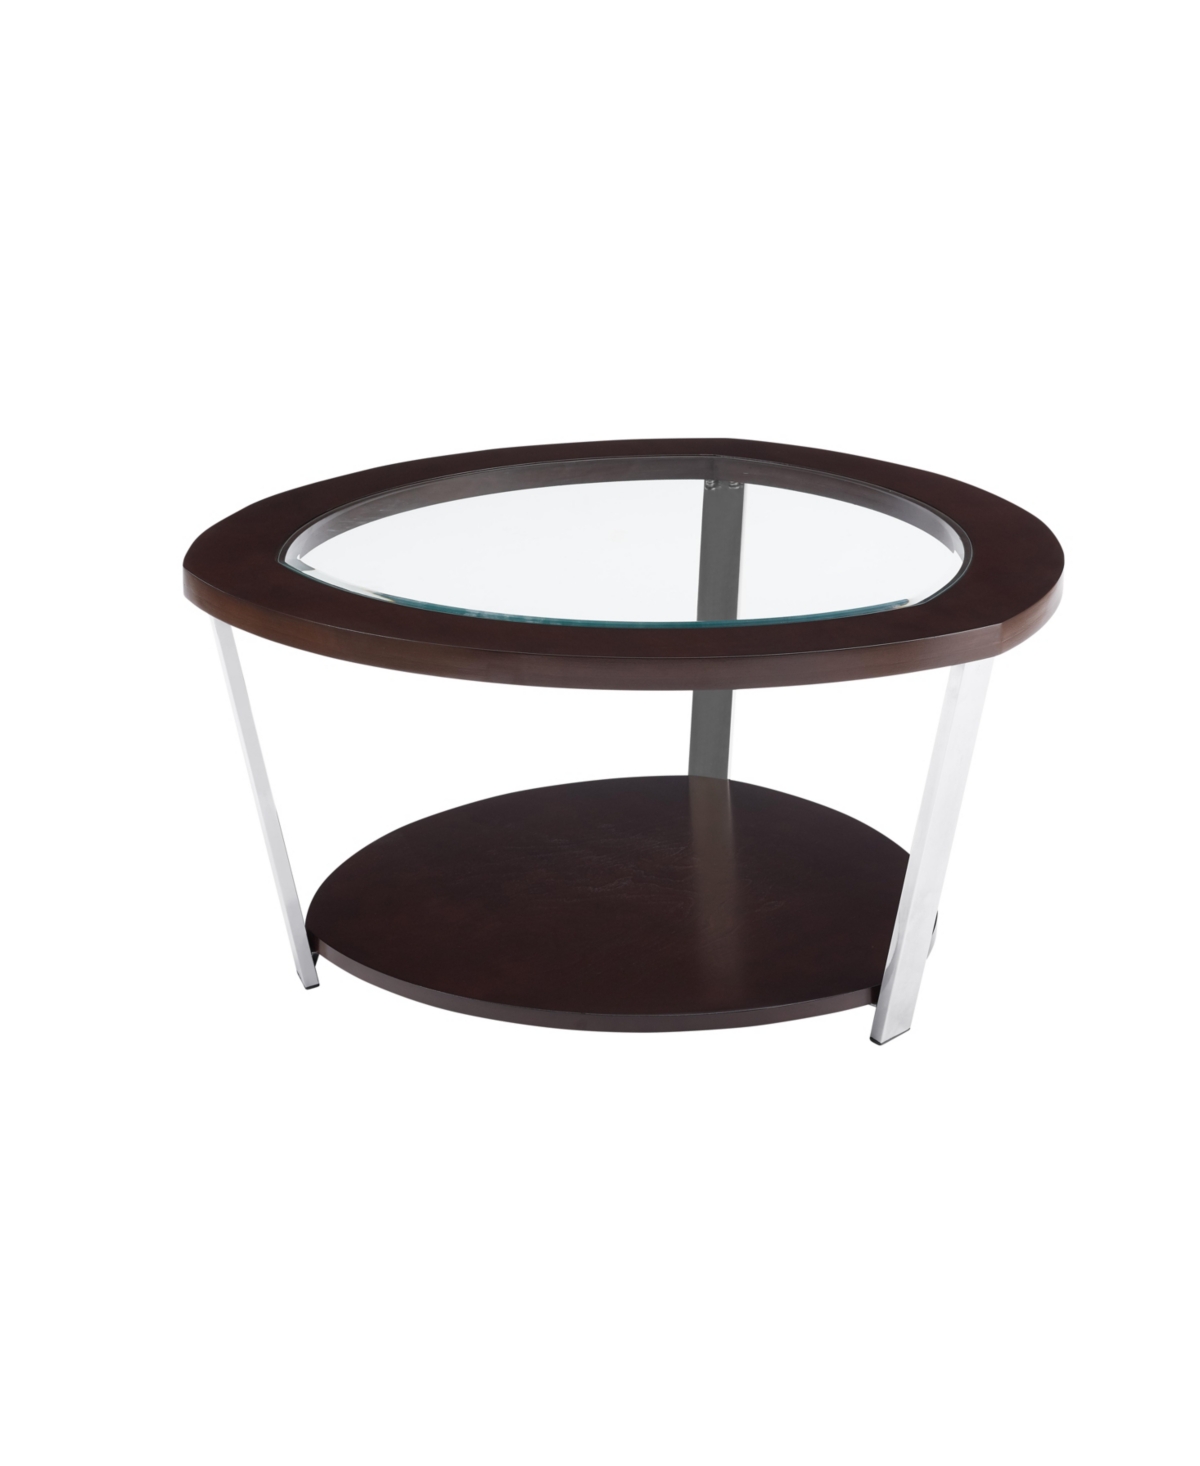 Steve Silver Duncan 35" Round Mixed Media Cocktail Table In Espresso Finish